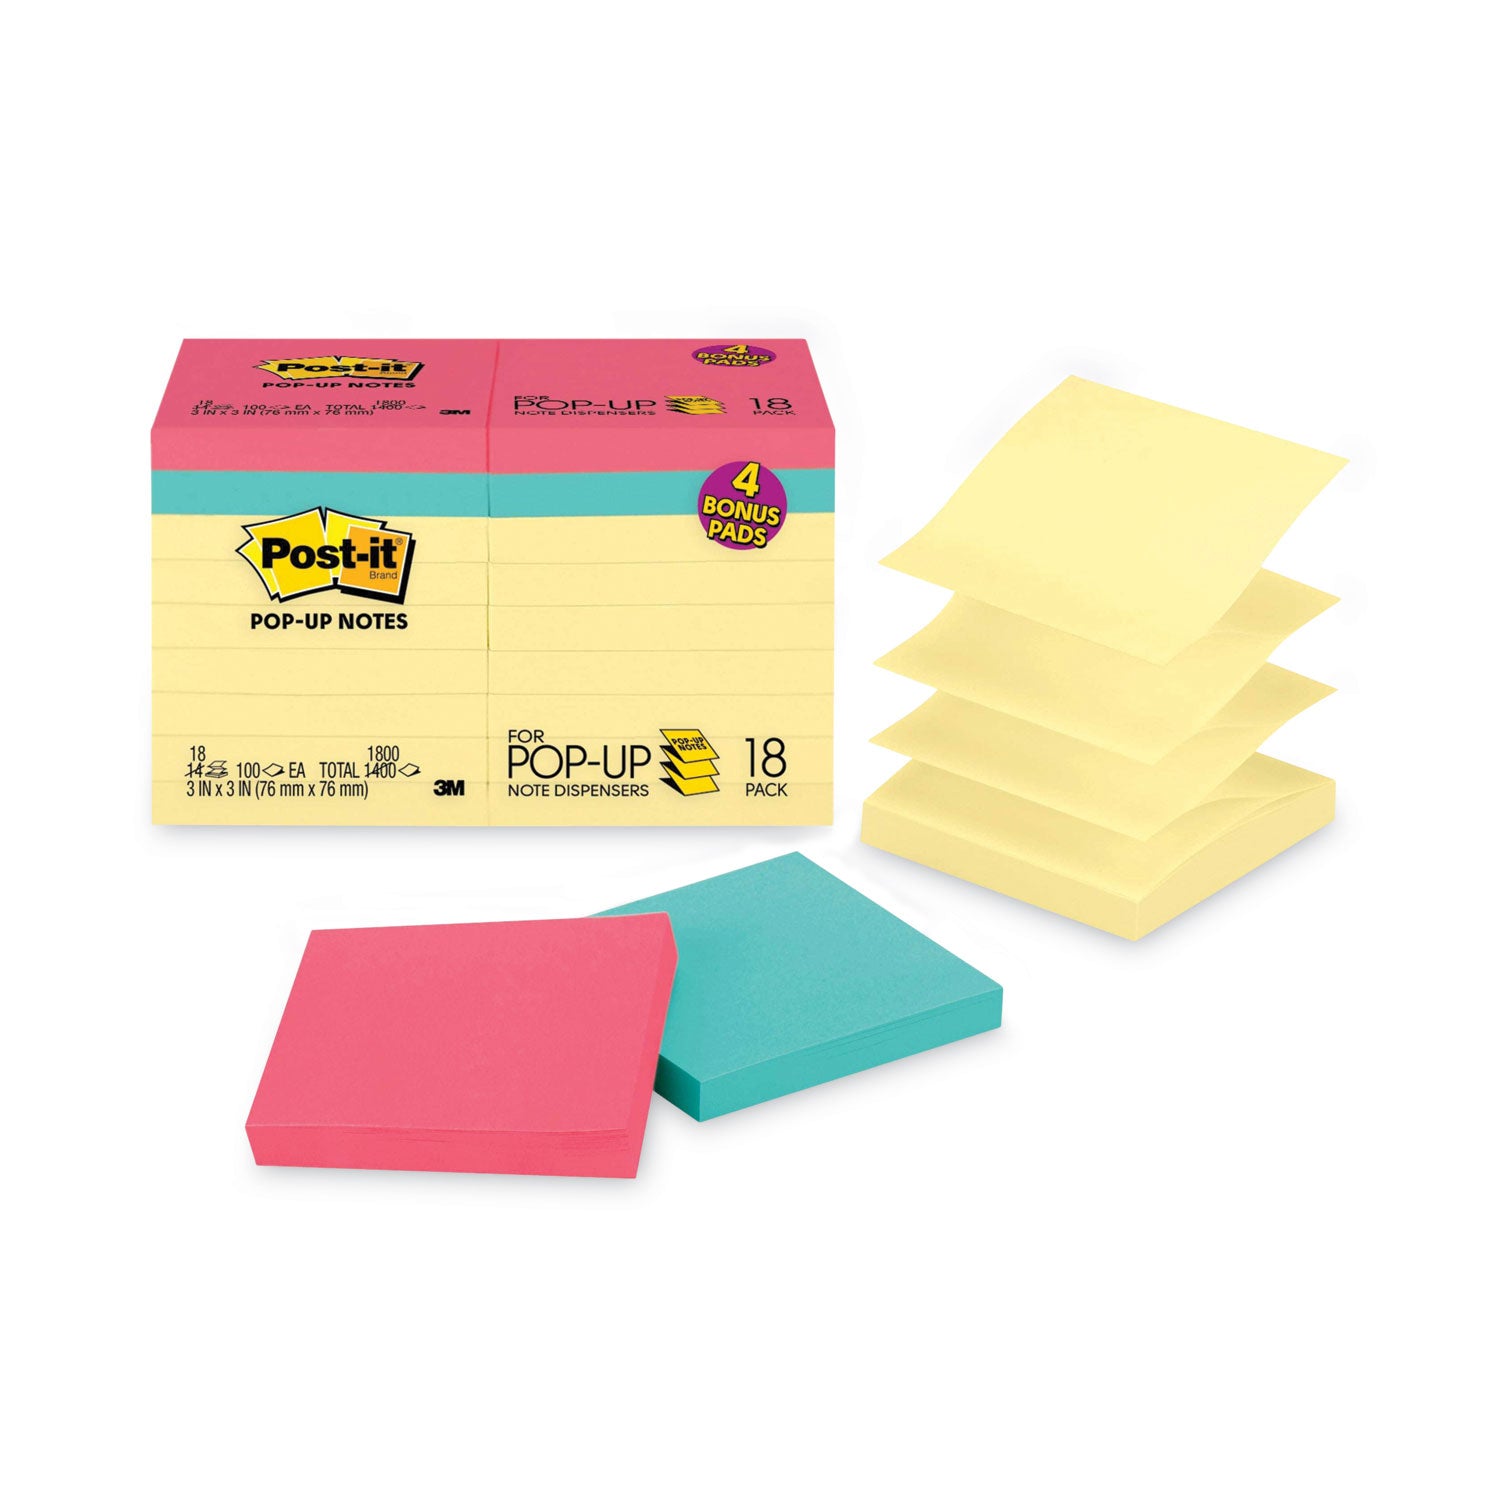 Original Pop-up Notes Value Pack, 3 x 3, (14) Canary Yellow, (4) Poptimistic Collection Colors, 100 Sheets/Pad, 18 Pads/Pack - 